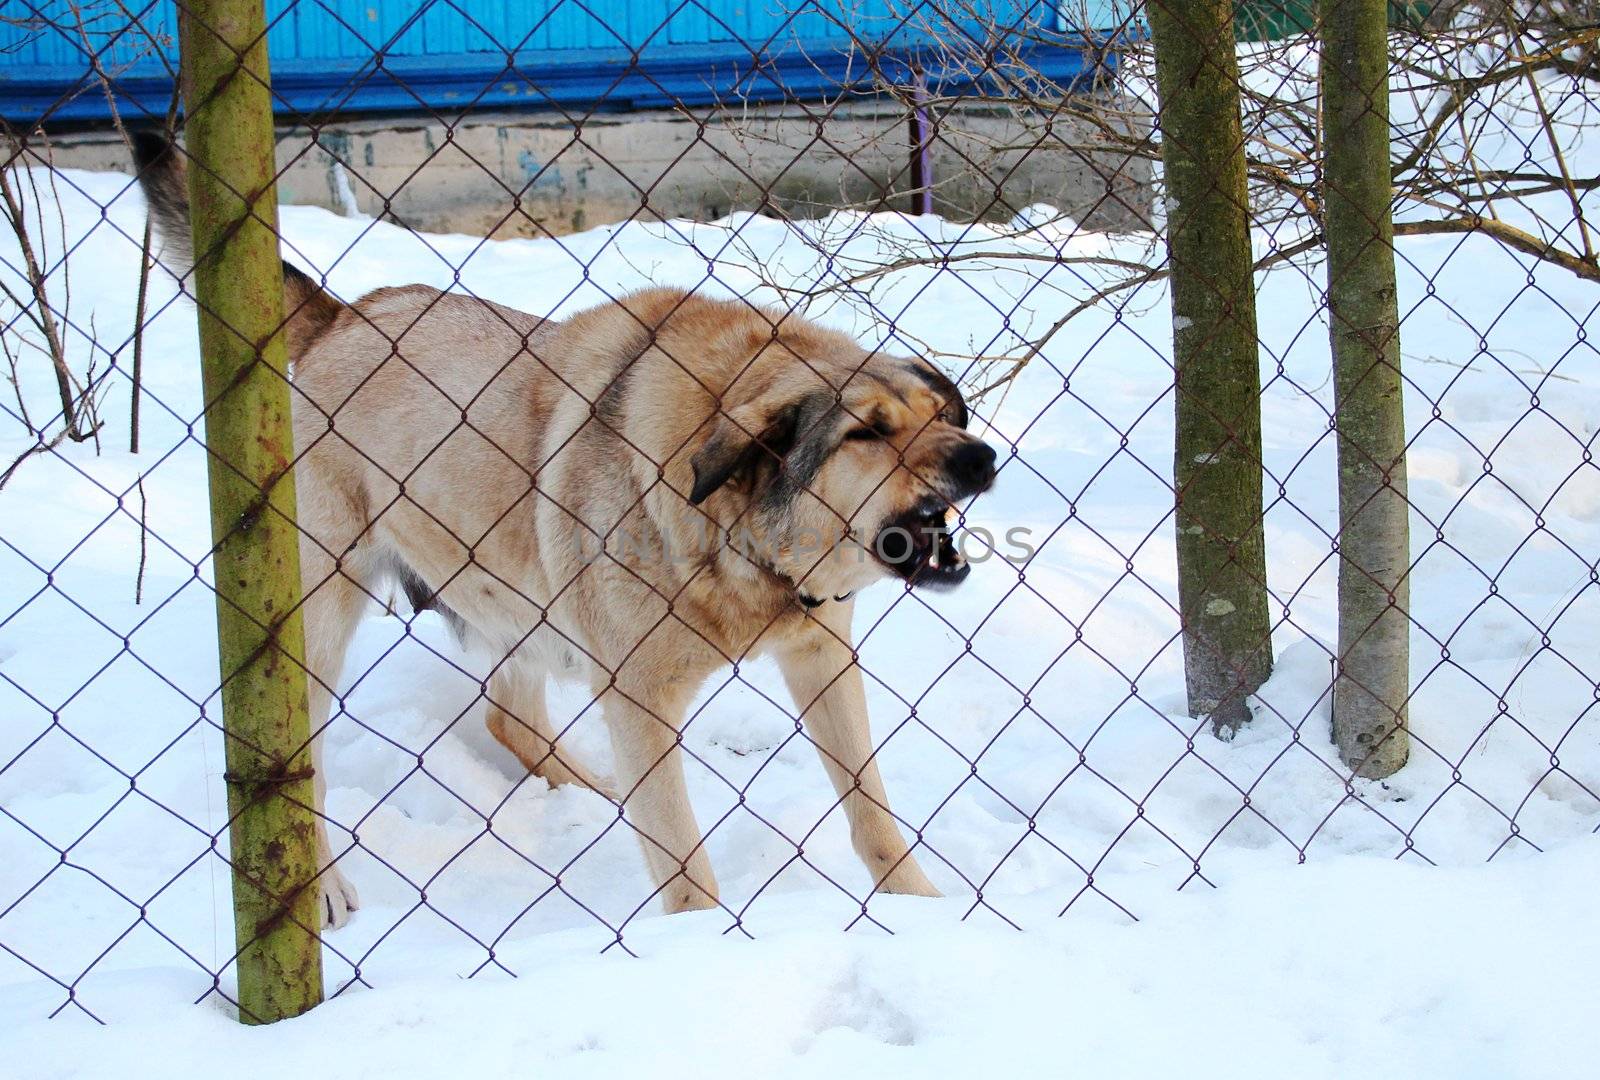 Beige dog barks, the guards behind the fence in the winter